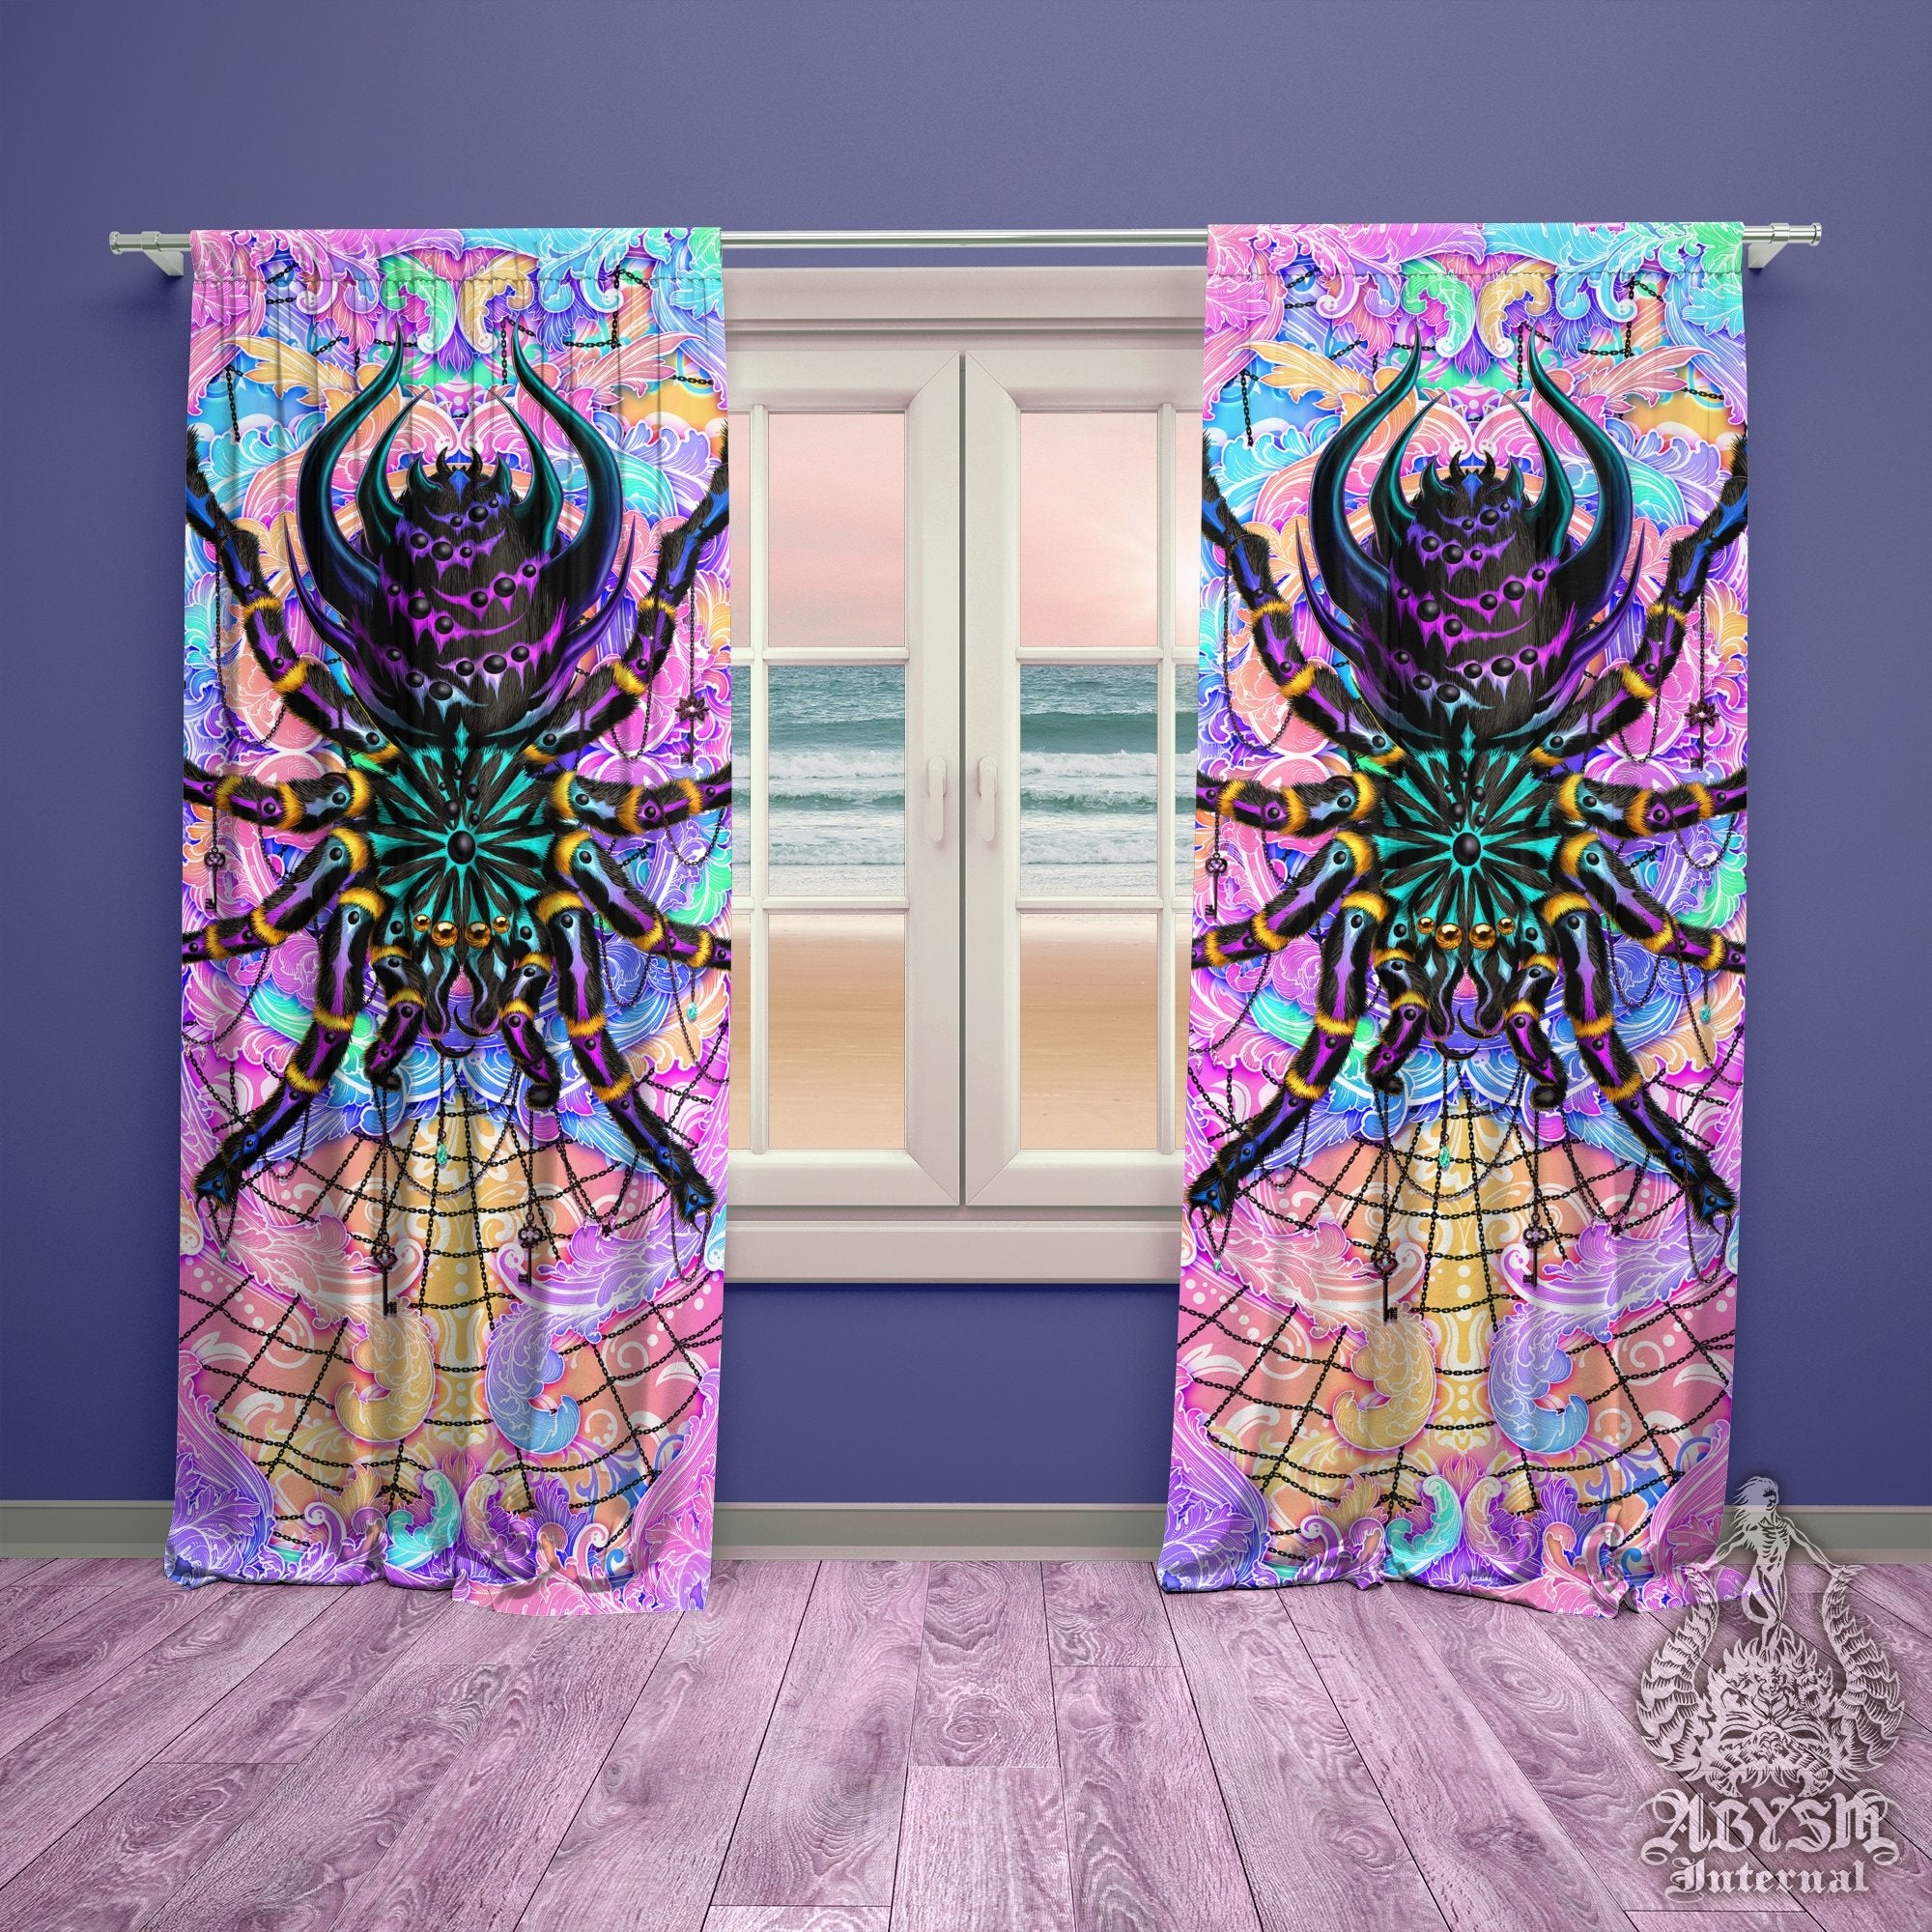 Pastel Punk Black Blackout Curtains, Long Window Panels, Psychedelic Art Print, Kawaii Gamer Room Decor, Funky and Eclectic Home Decor - Tarantula, Aesthetic Spider - Abysm Internal